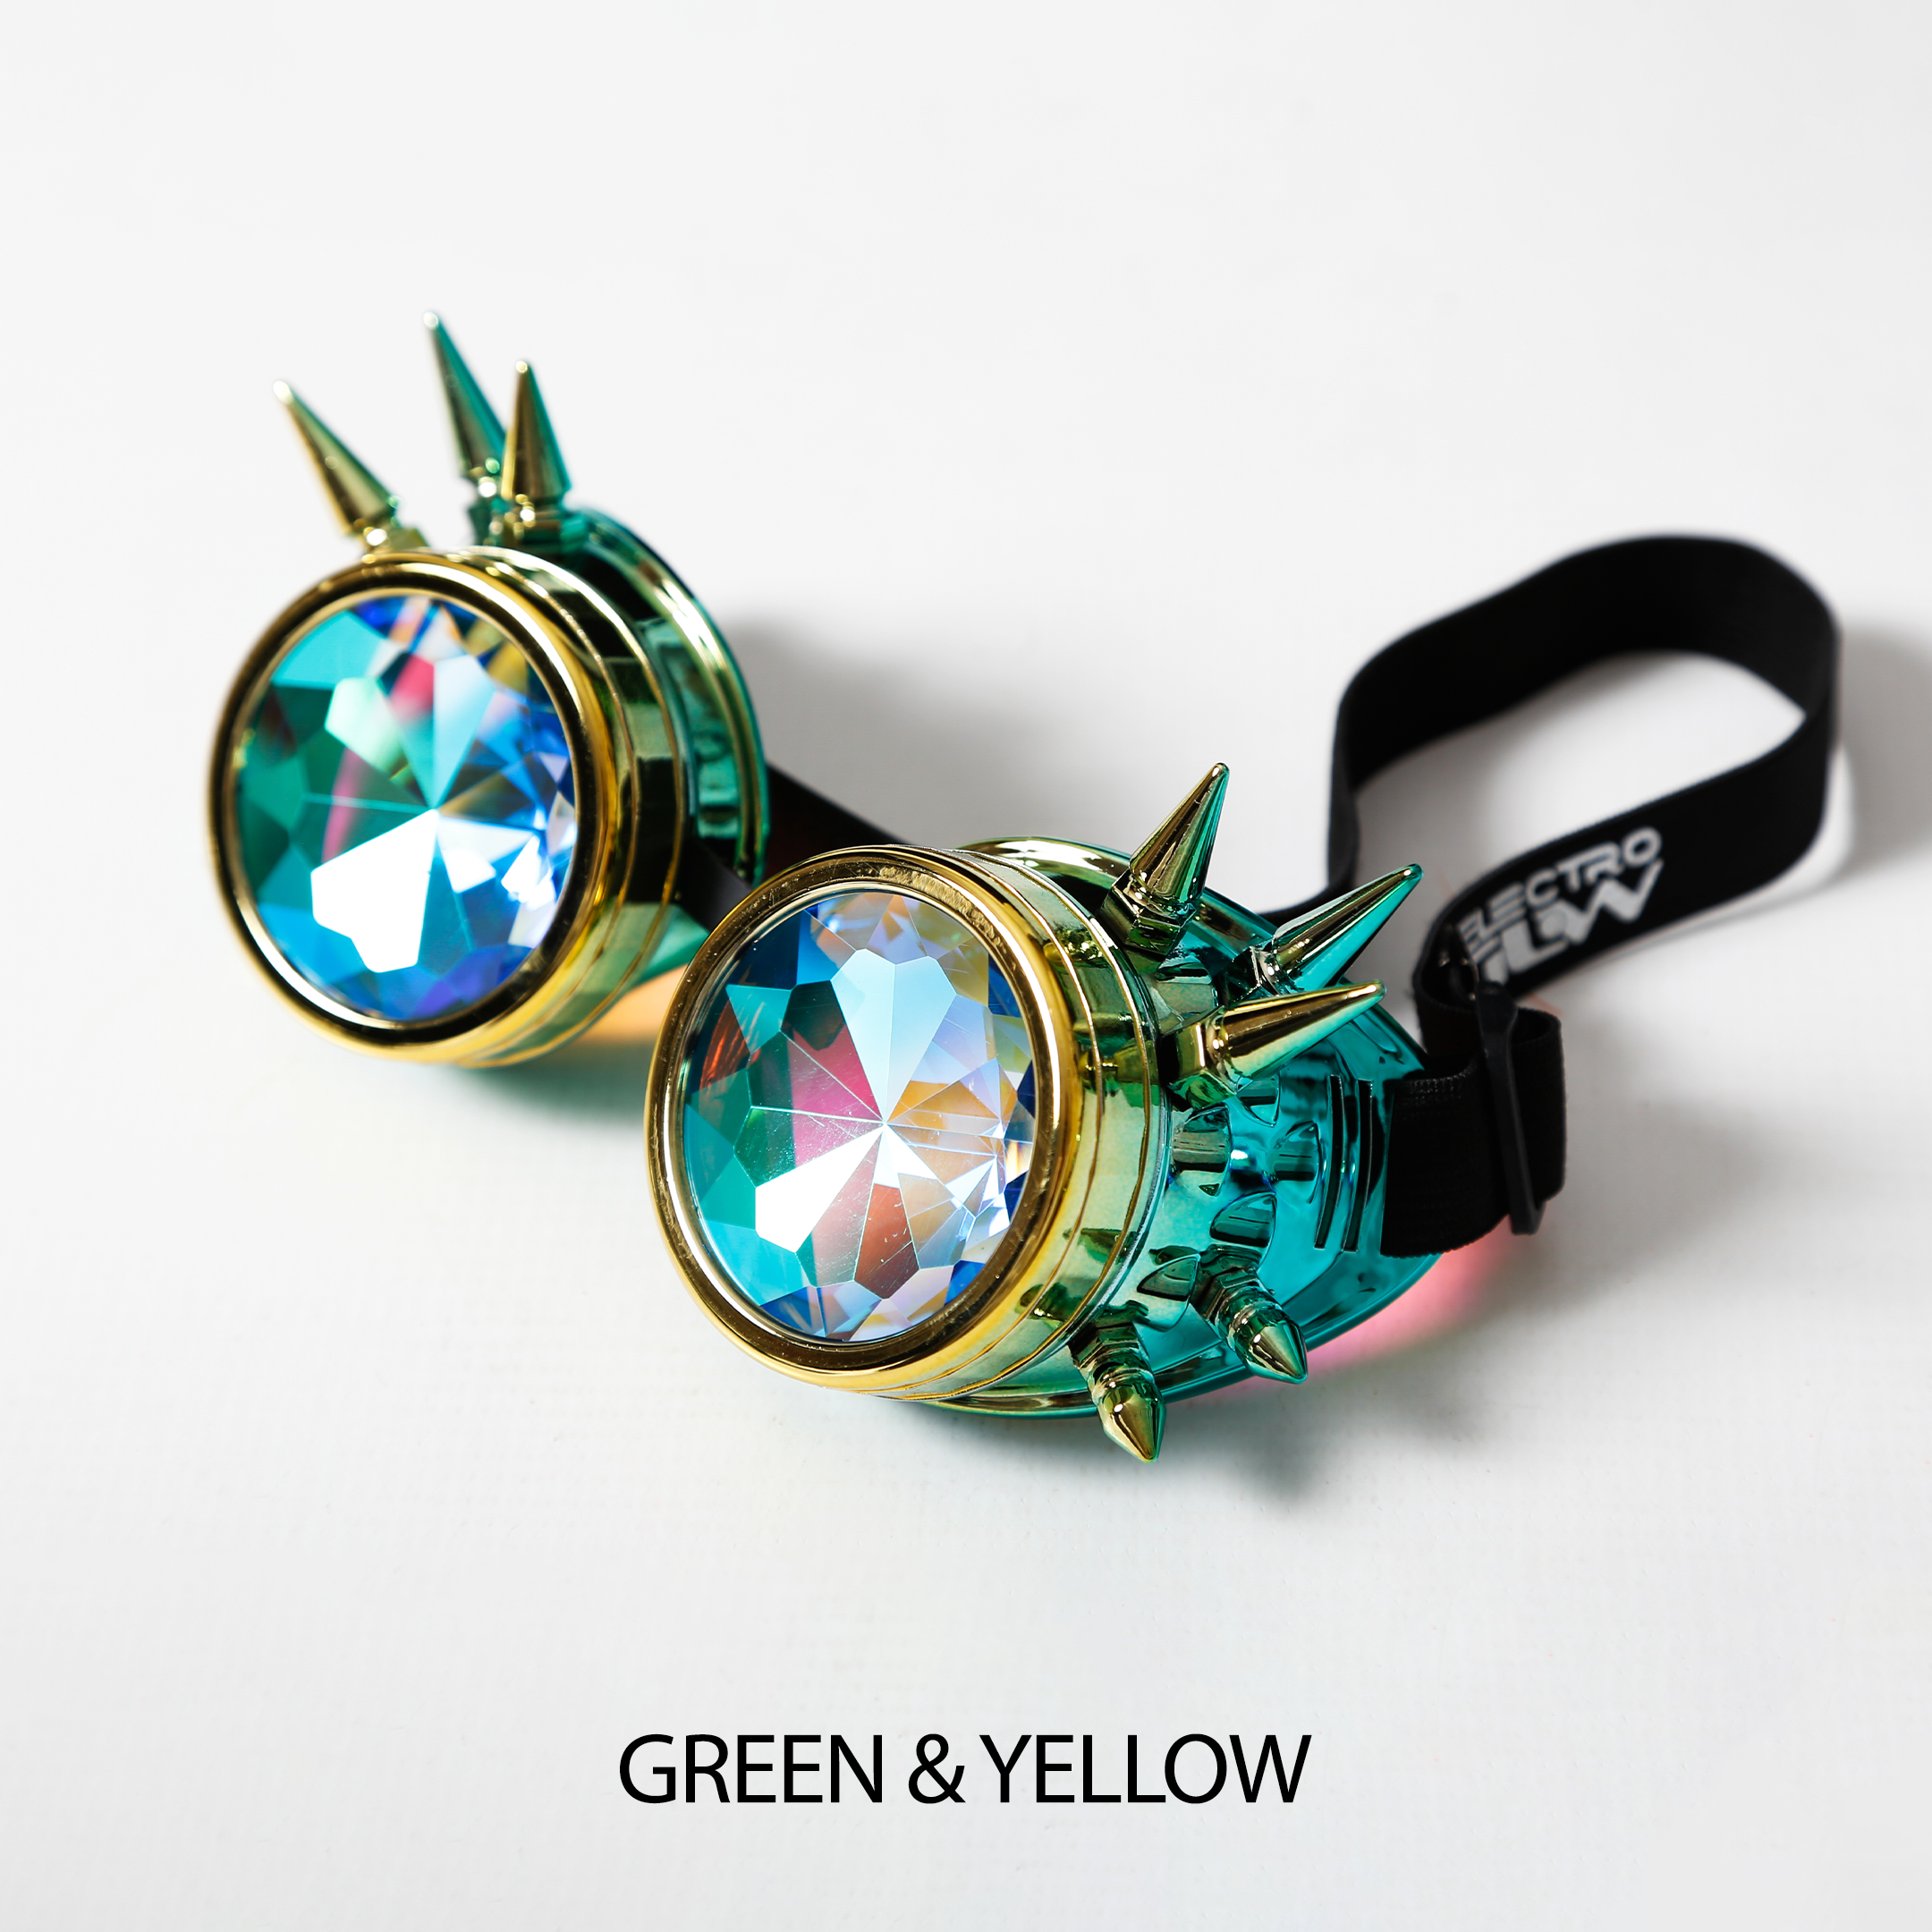 green steampunk kaleidoscope glasses Electro Glow | South Africa's Best LED Festival Gear & Rave Clothes - festivals outfits, clothes festival, festival clothing south africa, festival ideas outfits, festival outfits rave, festival wear, steam punk goggle, rave glasses, outfit for a rave, kaleidoscope glasses, diffraction glasses, clothes for a rave, rave sunglasses, spectral glasses, rave goggles, clothes for a rave, rave clothing south africa, festival wear south africa, accessories festival